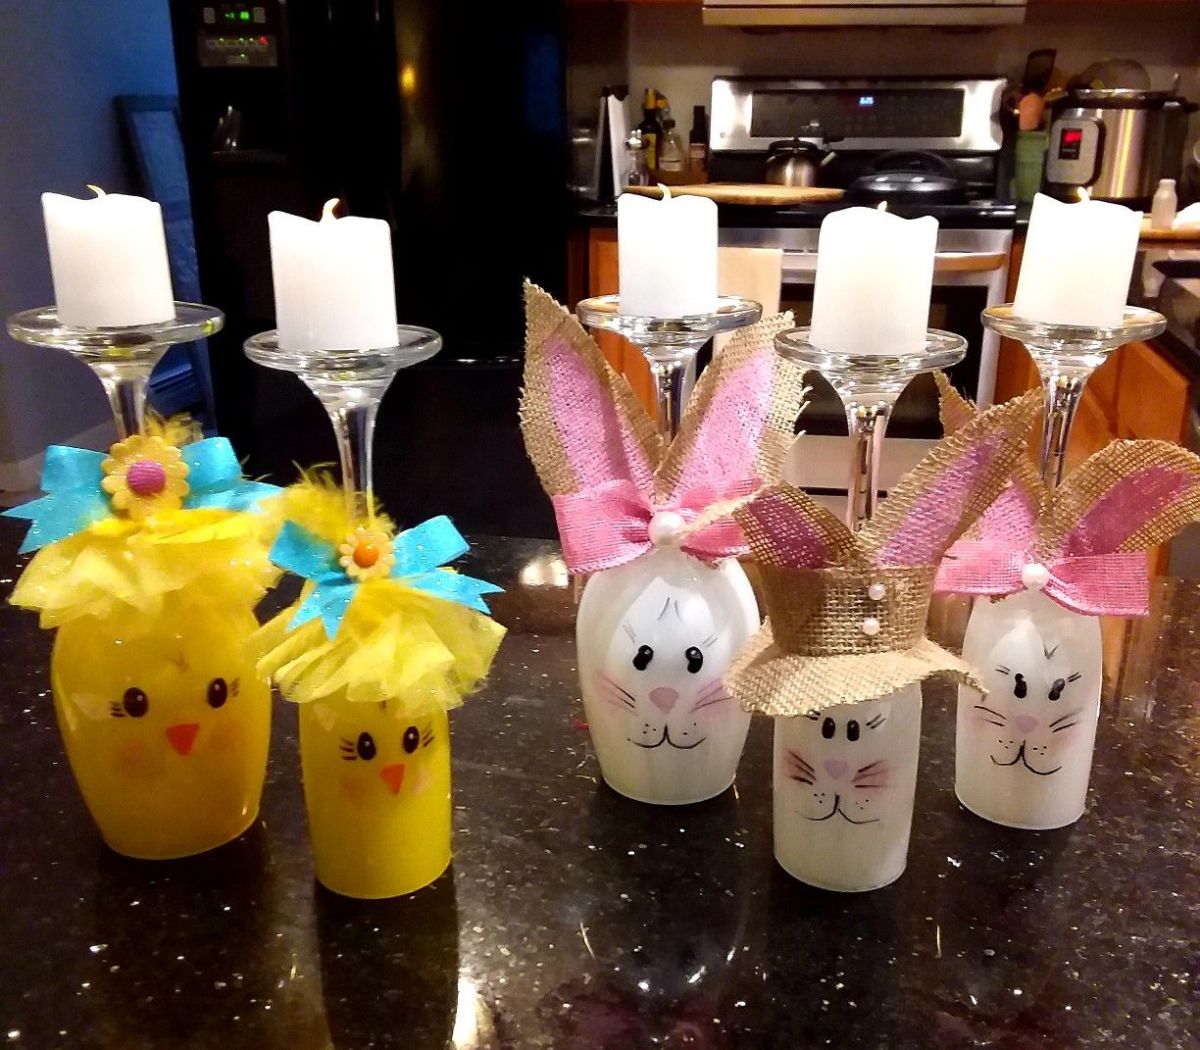 Paint wine glasses to look like Easter creatures, then turn them into candle holders.